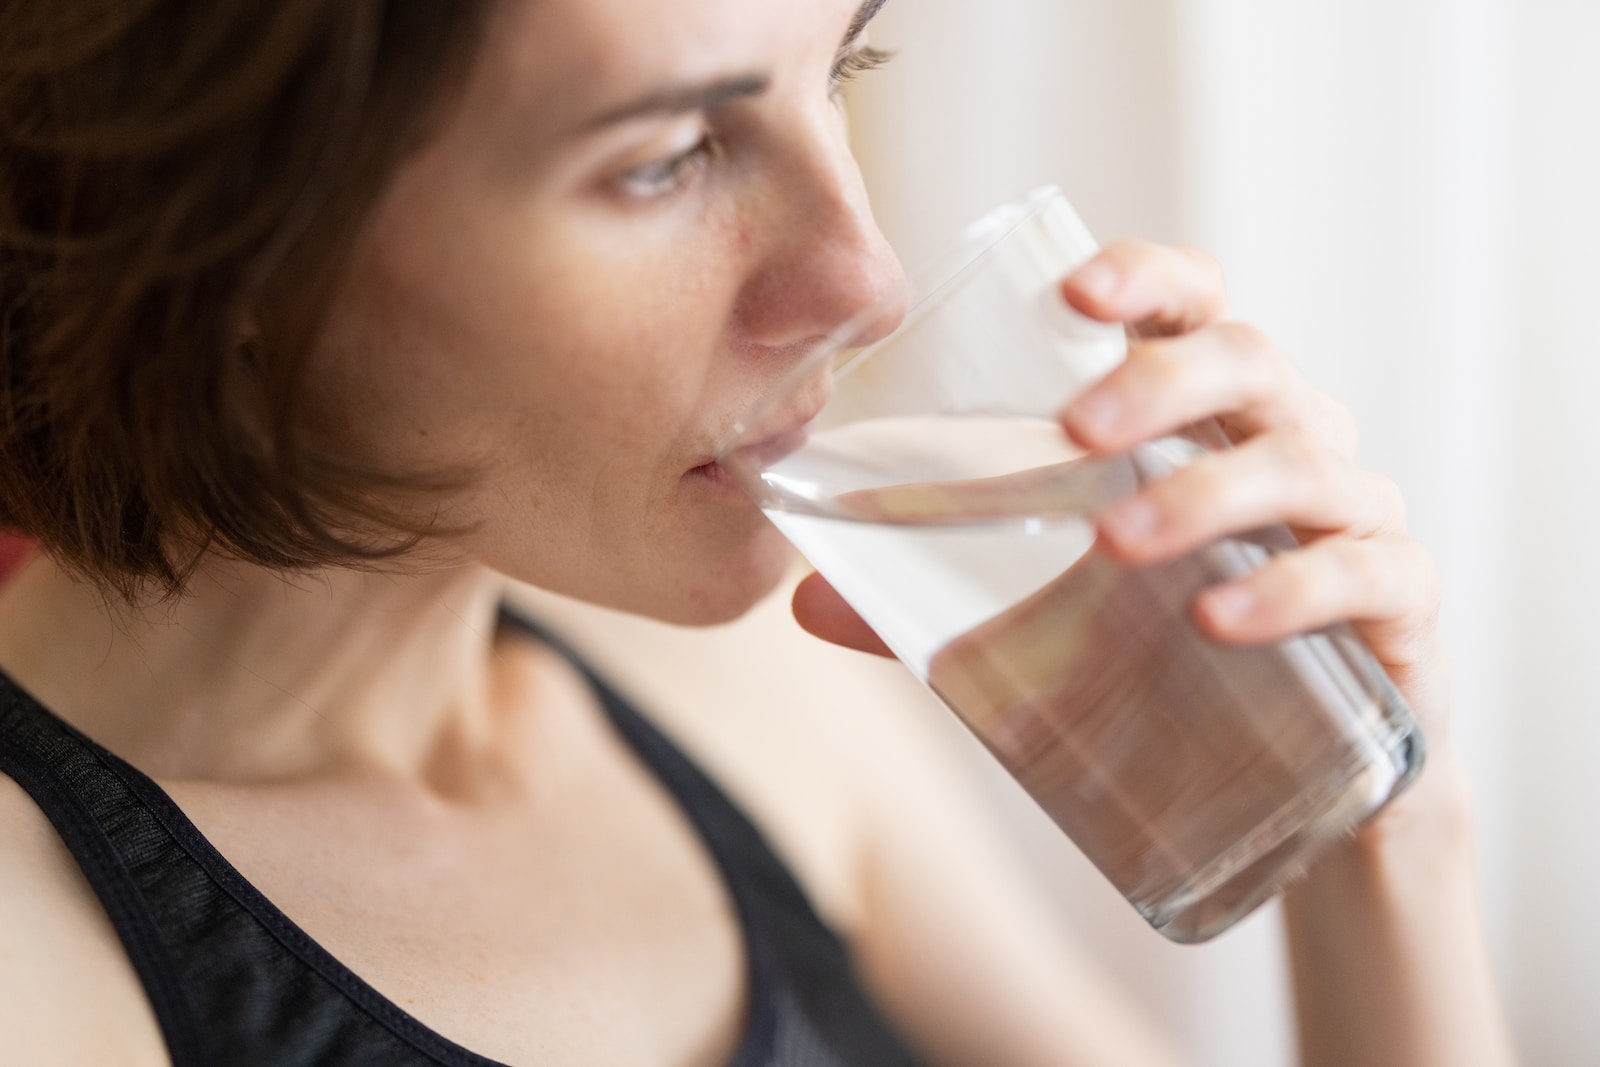 extreme weight loss methods dehydration